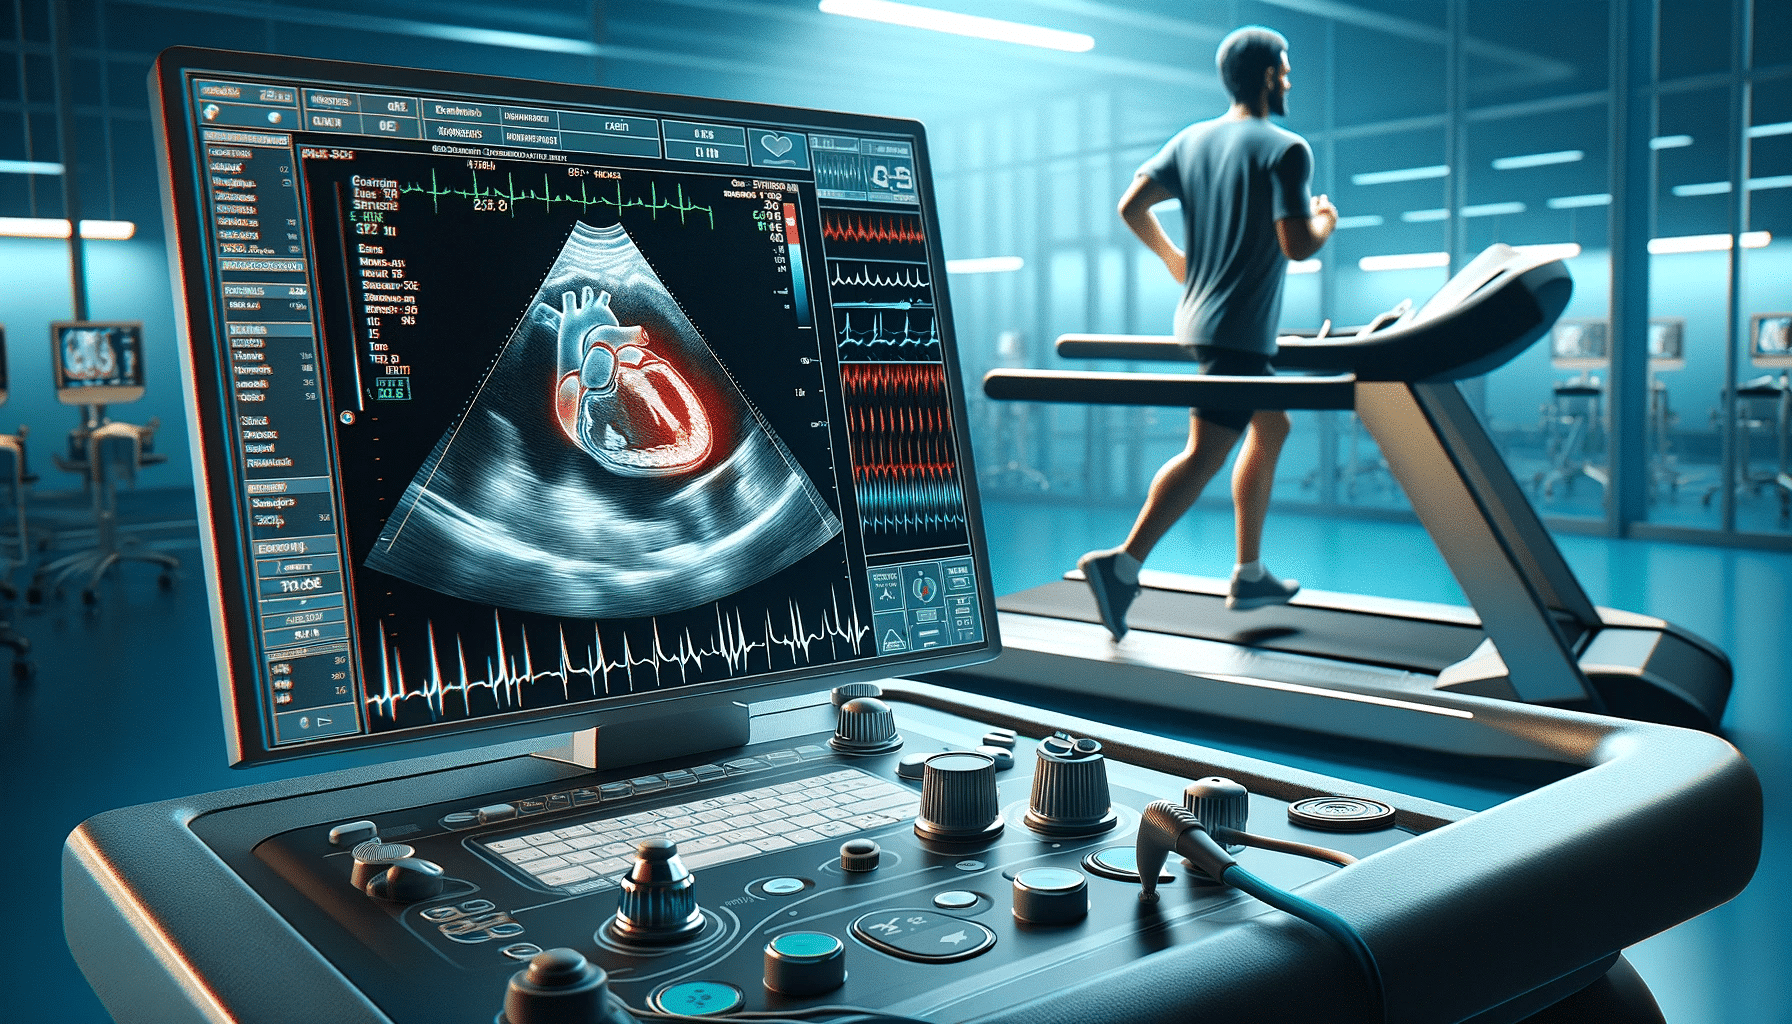 A highly detailed realistic horizontal image showing myocardial ischemia detection during a treadmill stress test featuring an echocardiogram machi